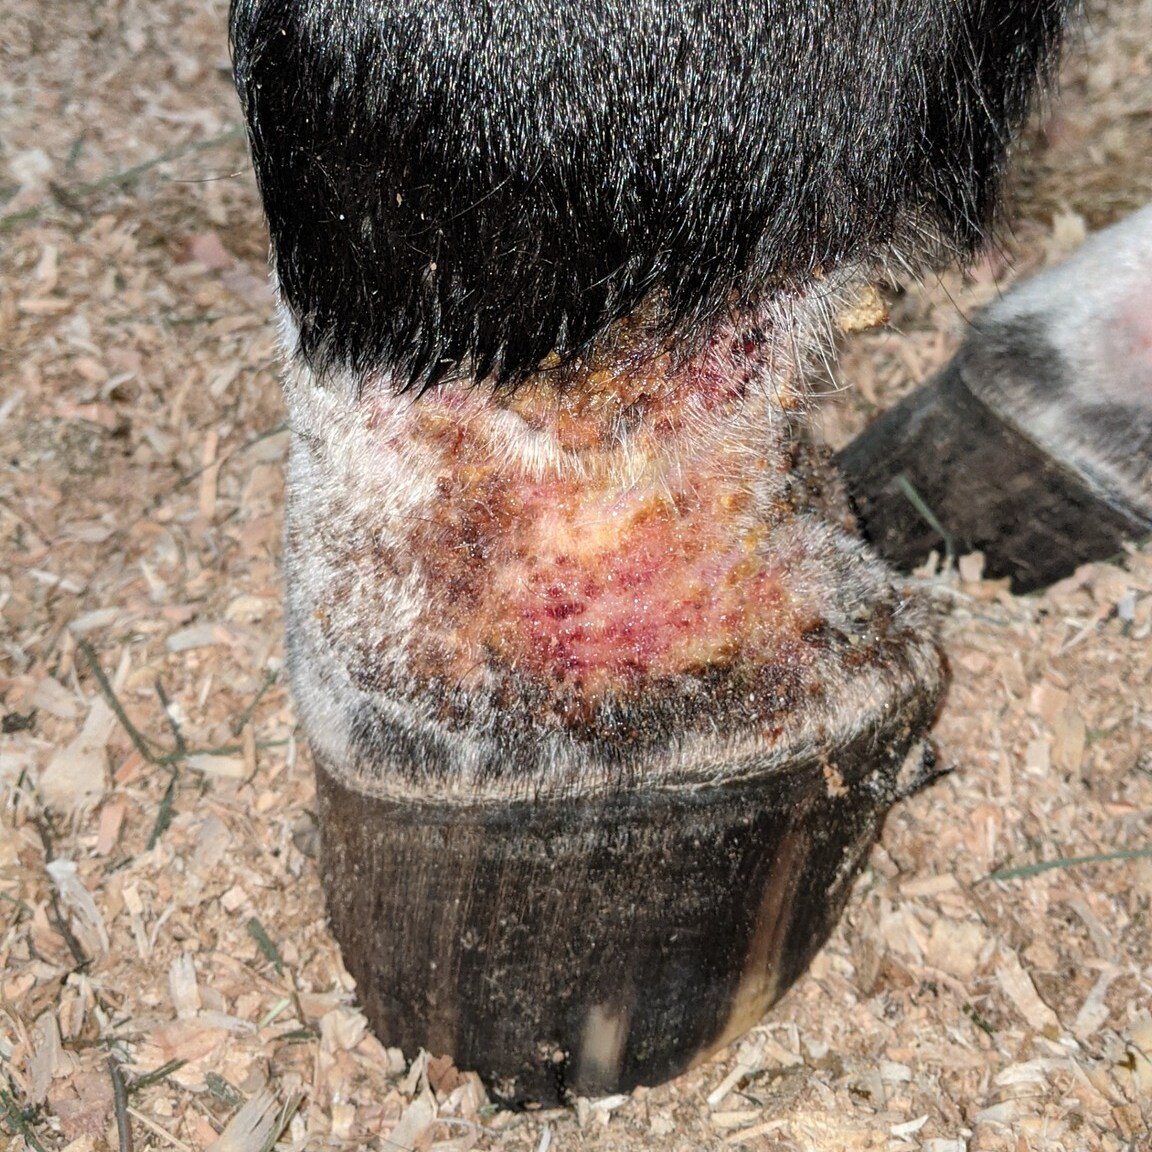 Pastern dermatitis (aka mud fever, scratches)

While this is a problem that plagues horses every year, the overall wet and warm winter this year has created some spectacularly moist and muddy conditions and we are seeing  an increased number of sever